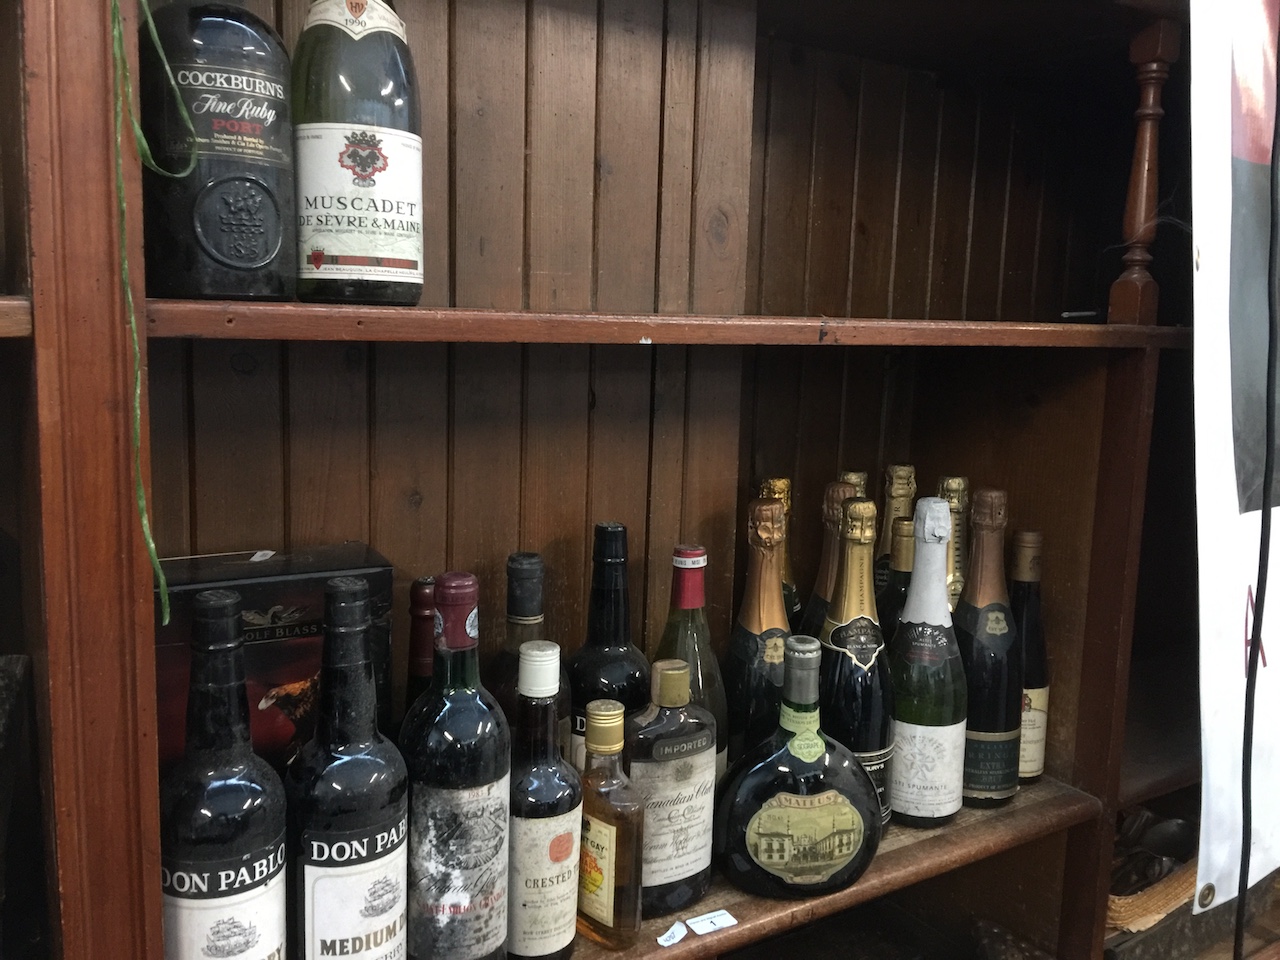 A quantity of mixed alcoholic drinks including wines, champagne, whisky, rum and a bottle of Chateau